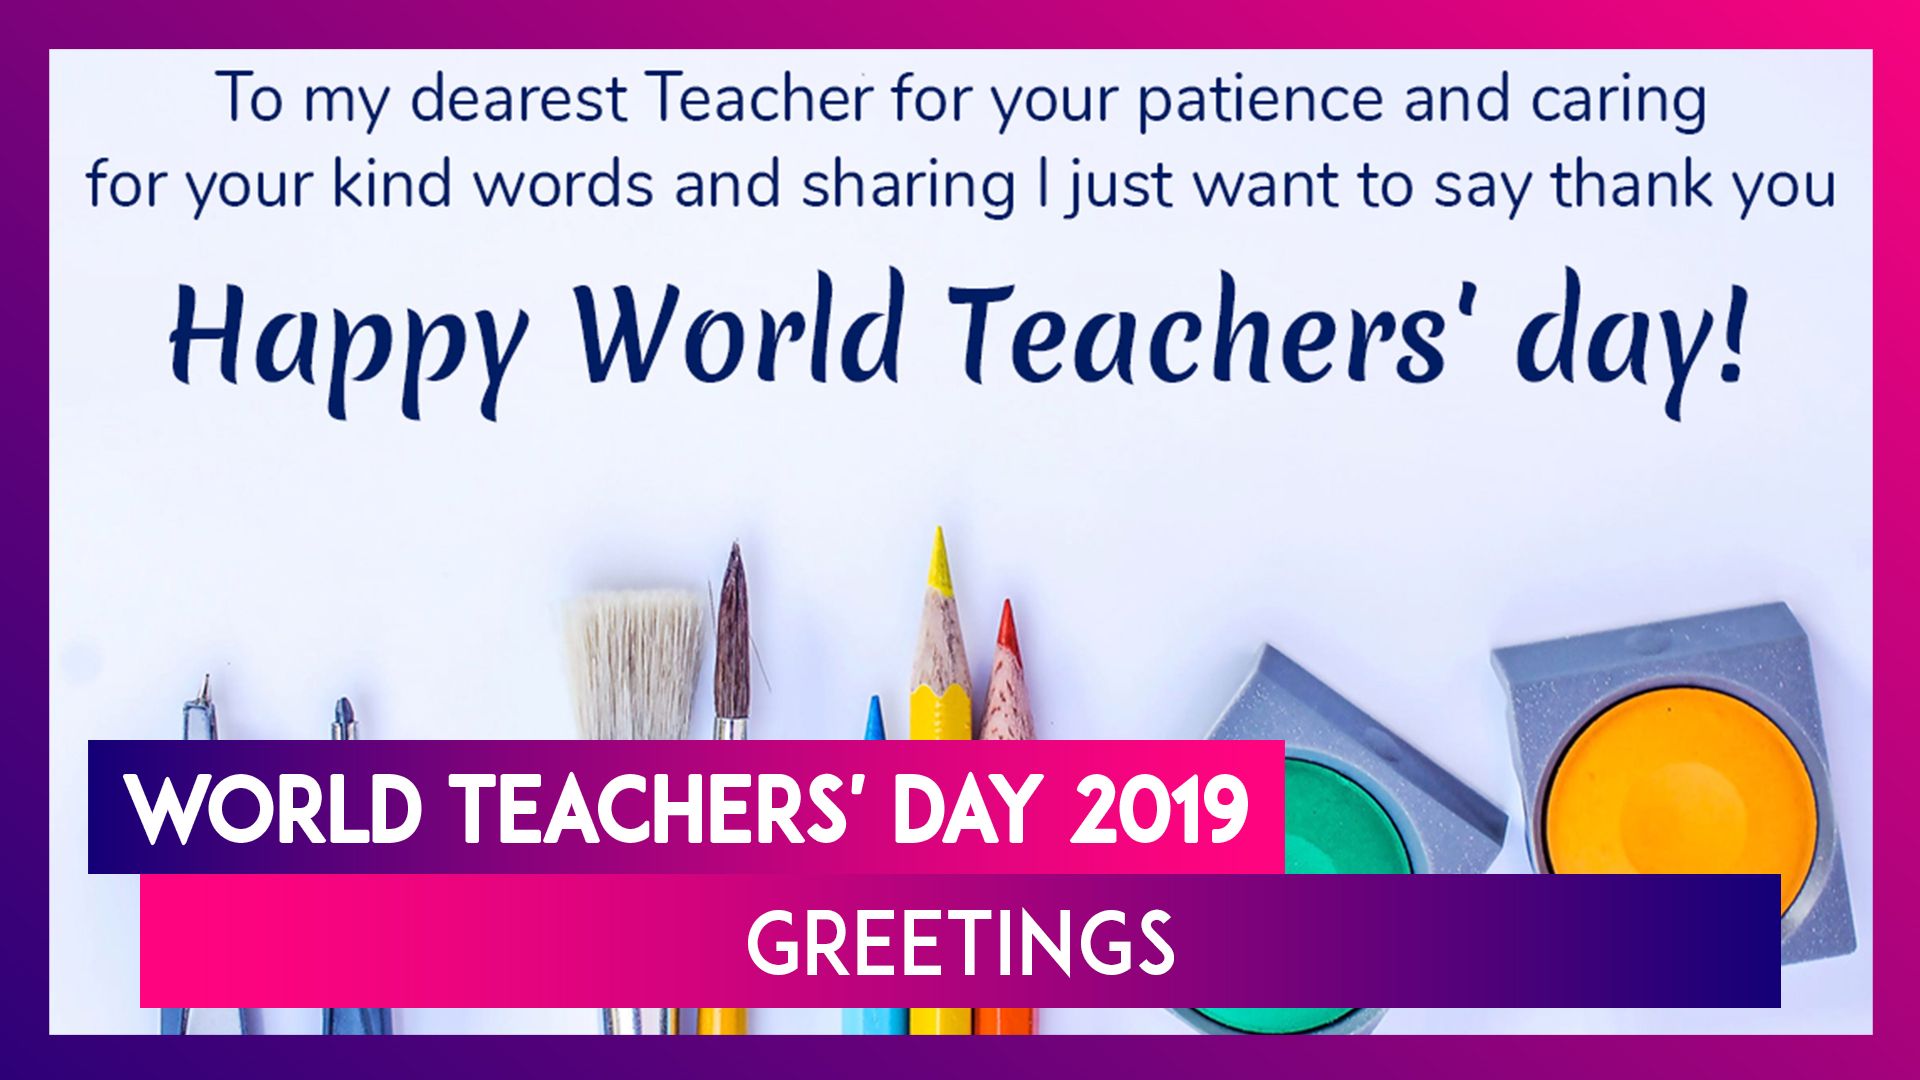 World Teachers' Day 2019 Greetings: Best Messages & Image to Send Grateful Wishes to All Mentors